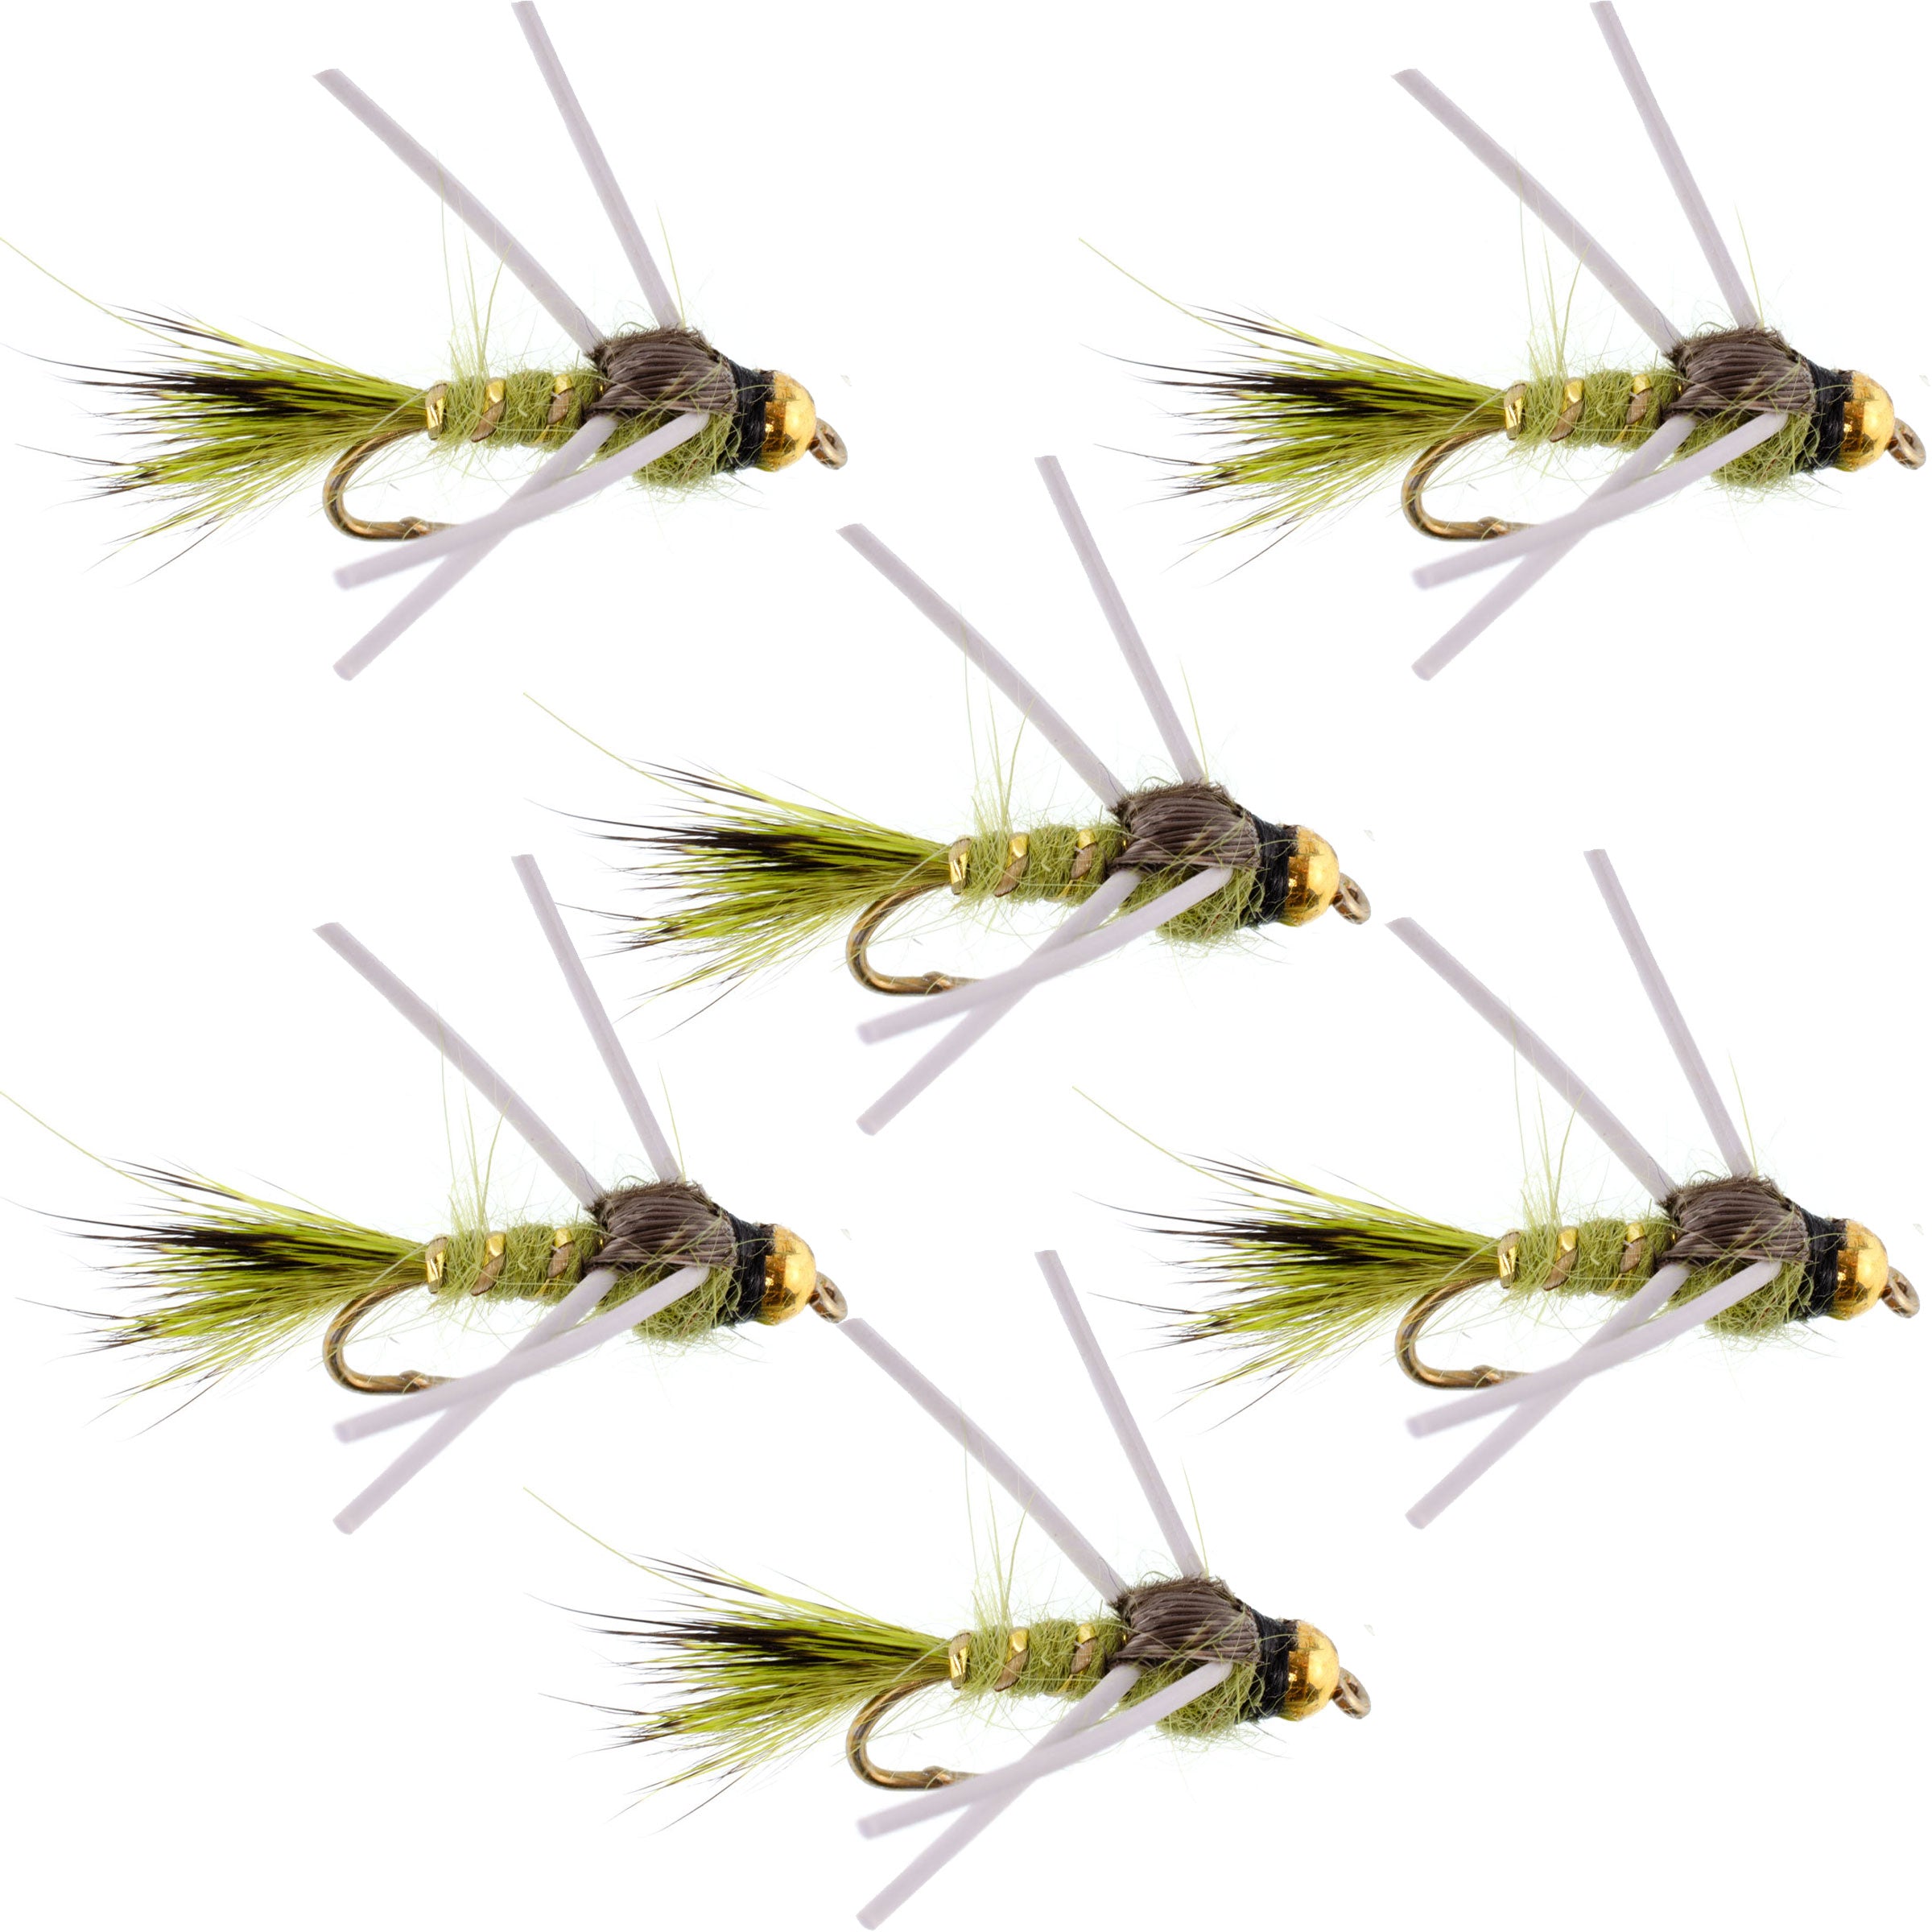 Tungsten Bead Head Rubber Legs Olive Gold-Ribbed Hare's Ear Trout Fly Nymph - 6 Flies Hook Size 12